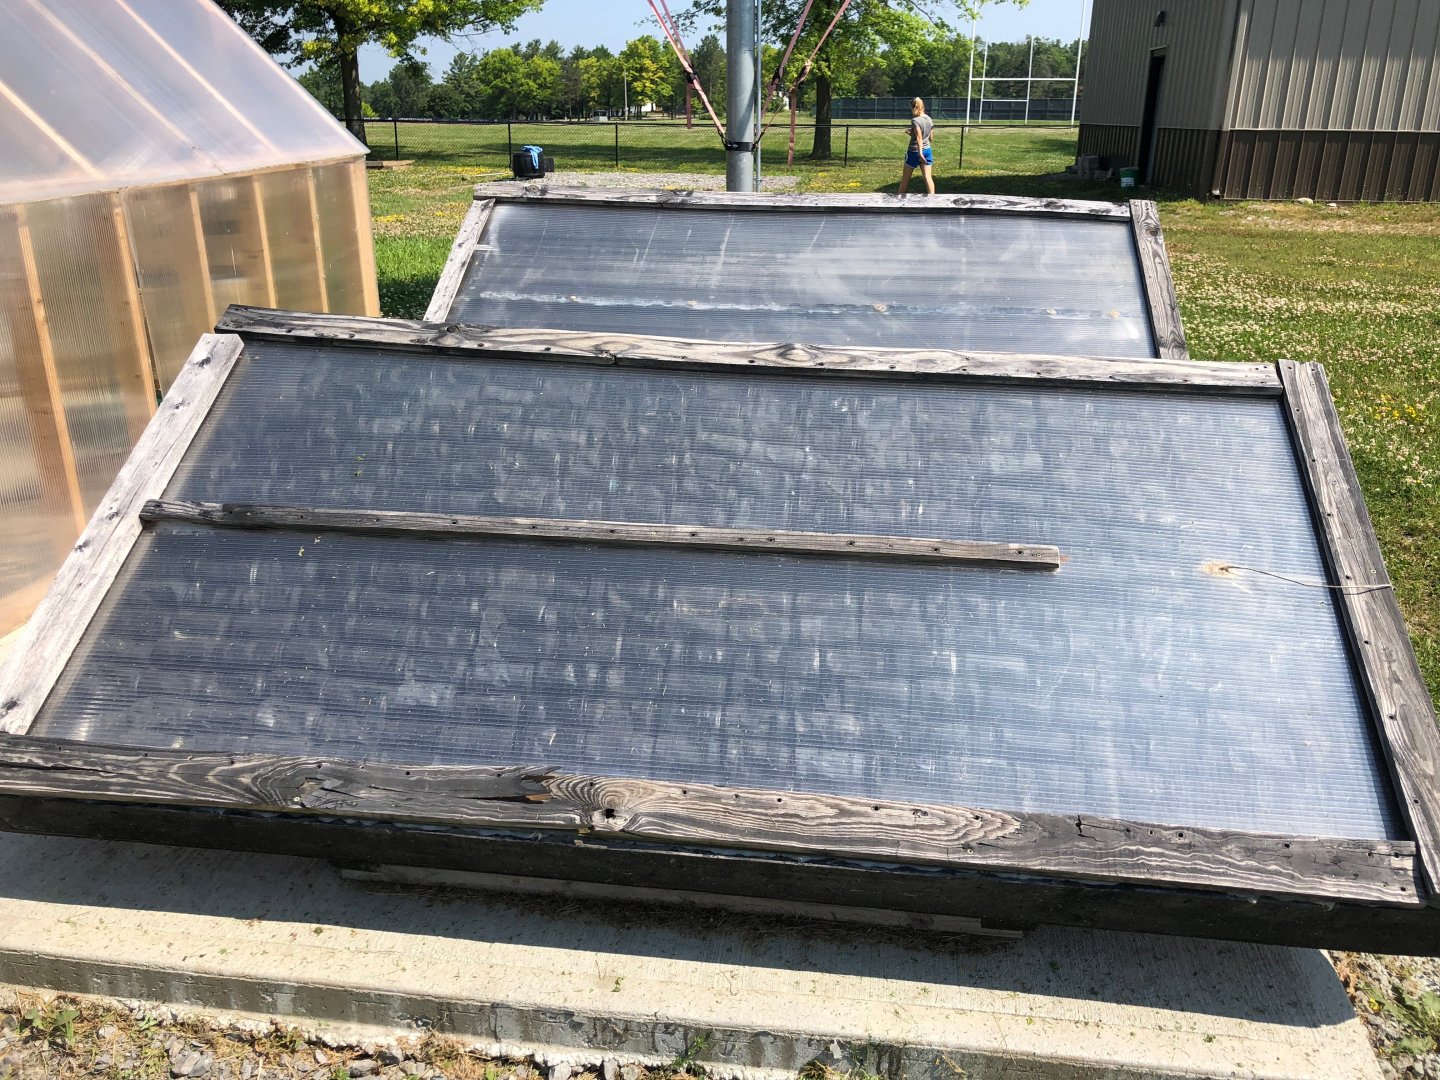 Solar collectors next to the greenhouse